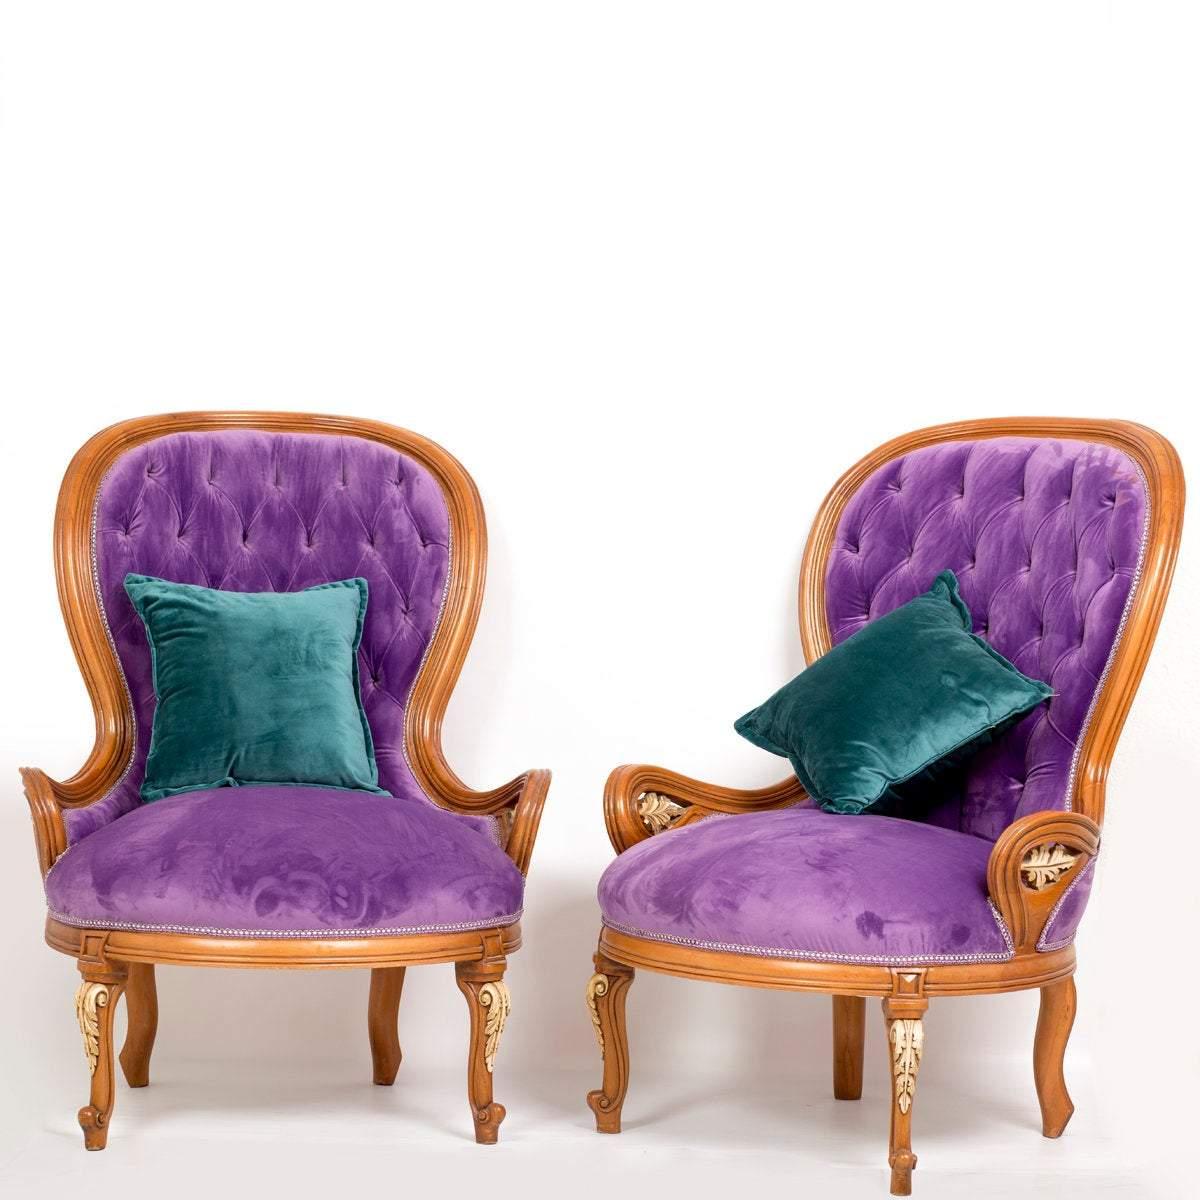 A beautiful purple tufted Bergère armchair (2-chair set), 20th century.

Handmade purple tufted Bergère armchair set is made of natural wood, the seats and tufted backs are upholstered with high density sponge and luxurious purple velvet cloth.